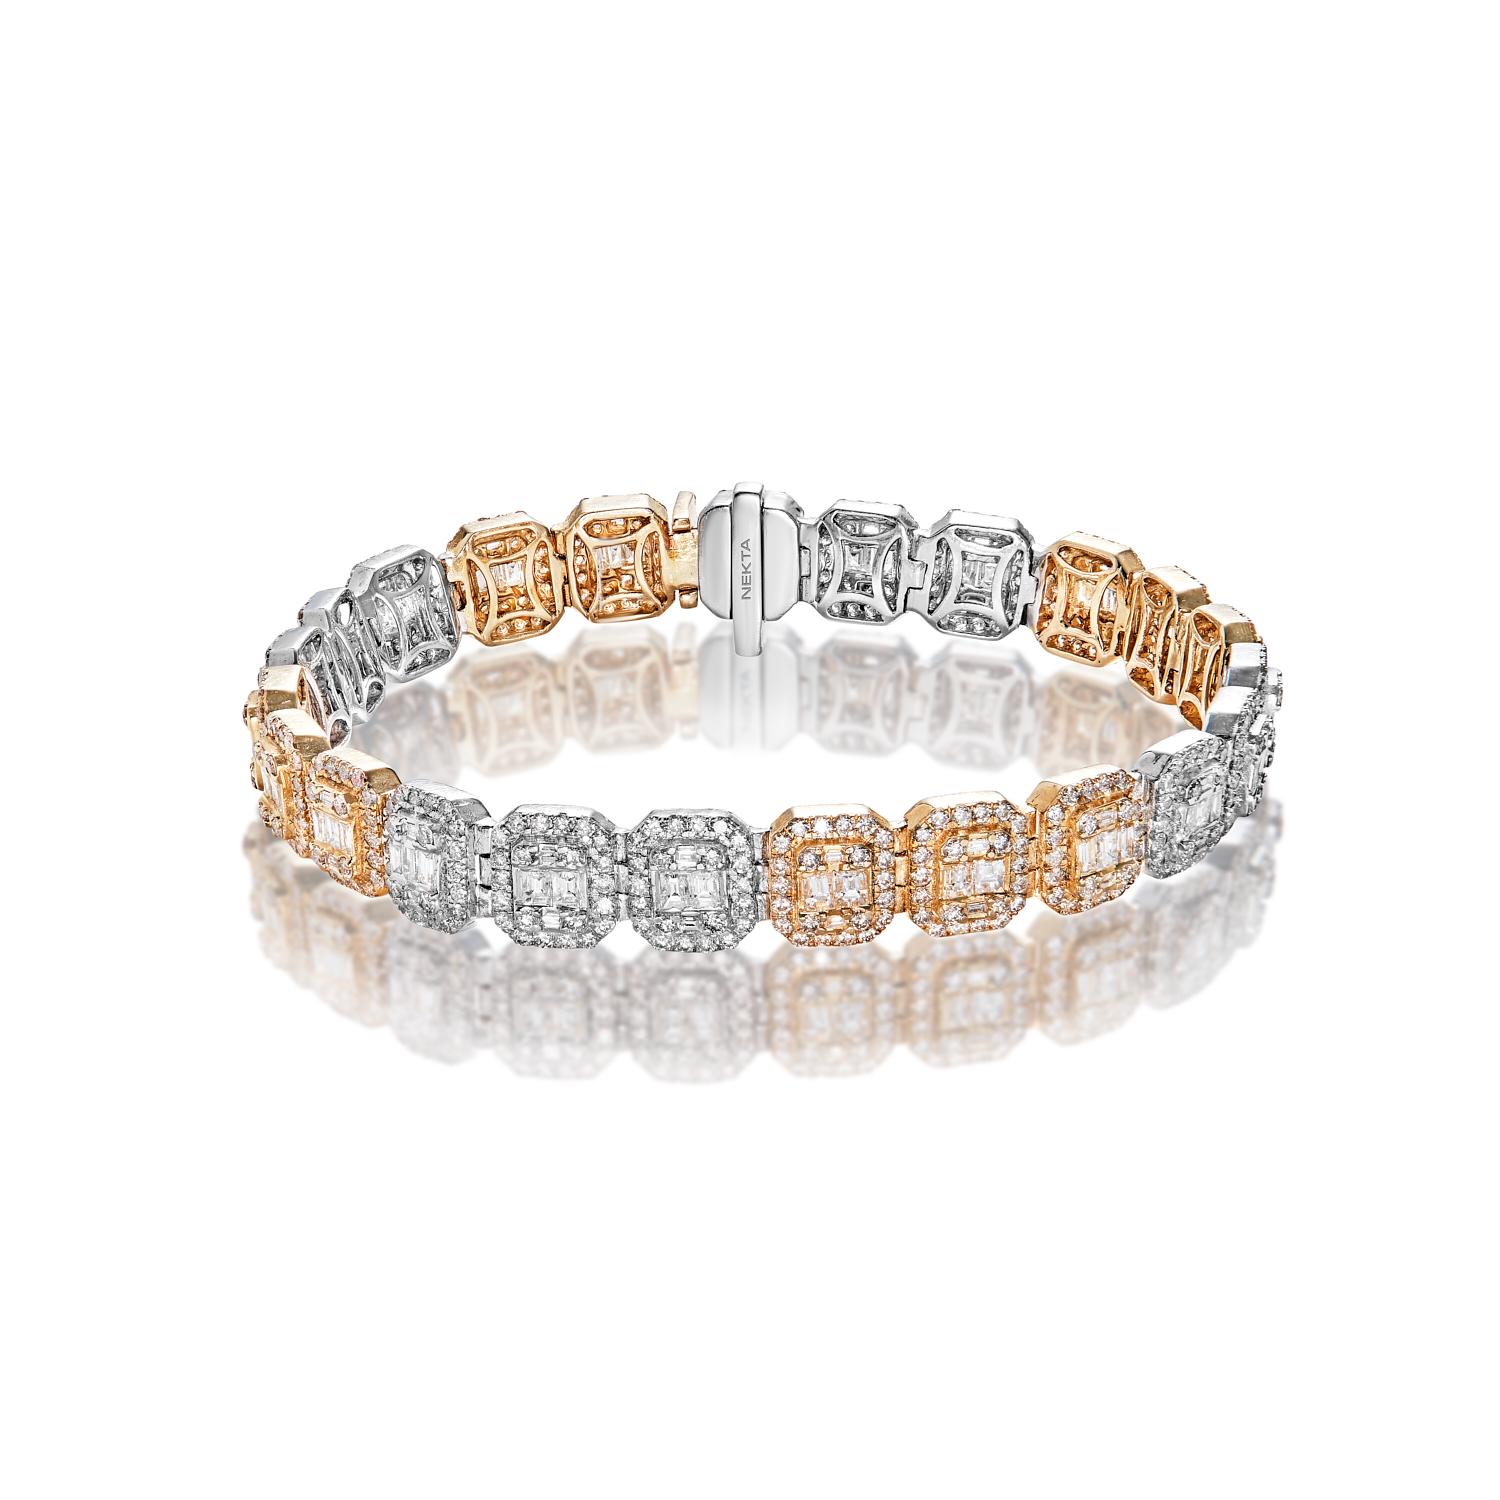 The Theodore Men’s 10 Carat Diamond Link Bracelet features Combine Mix Shape DIAMONDS brilliants weighing a total of approximately 10.21 Carats, set in 14 Karat White and Yellow Gold .

Diamonds
Diamond Size: 10.21 Carats
Diamond Shape: Combine Mix